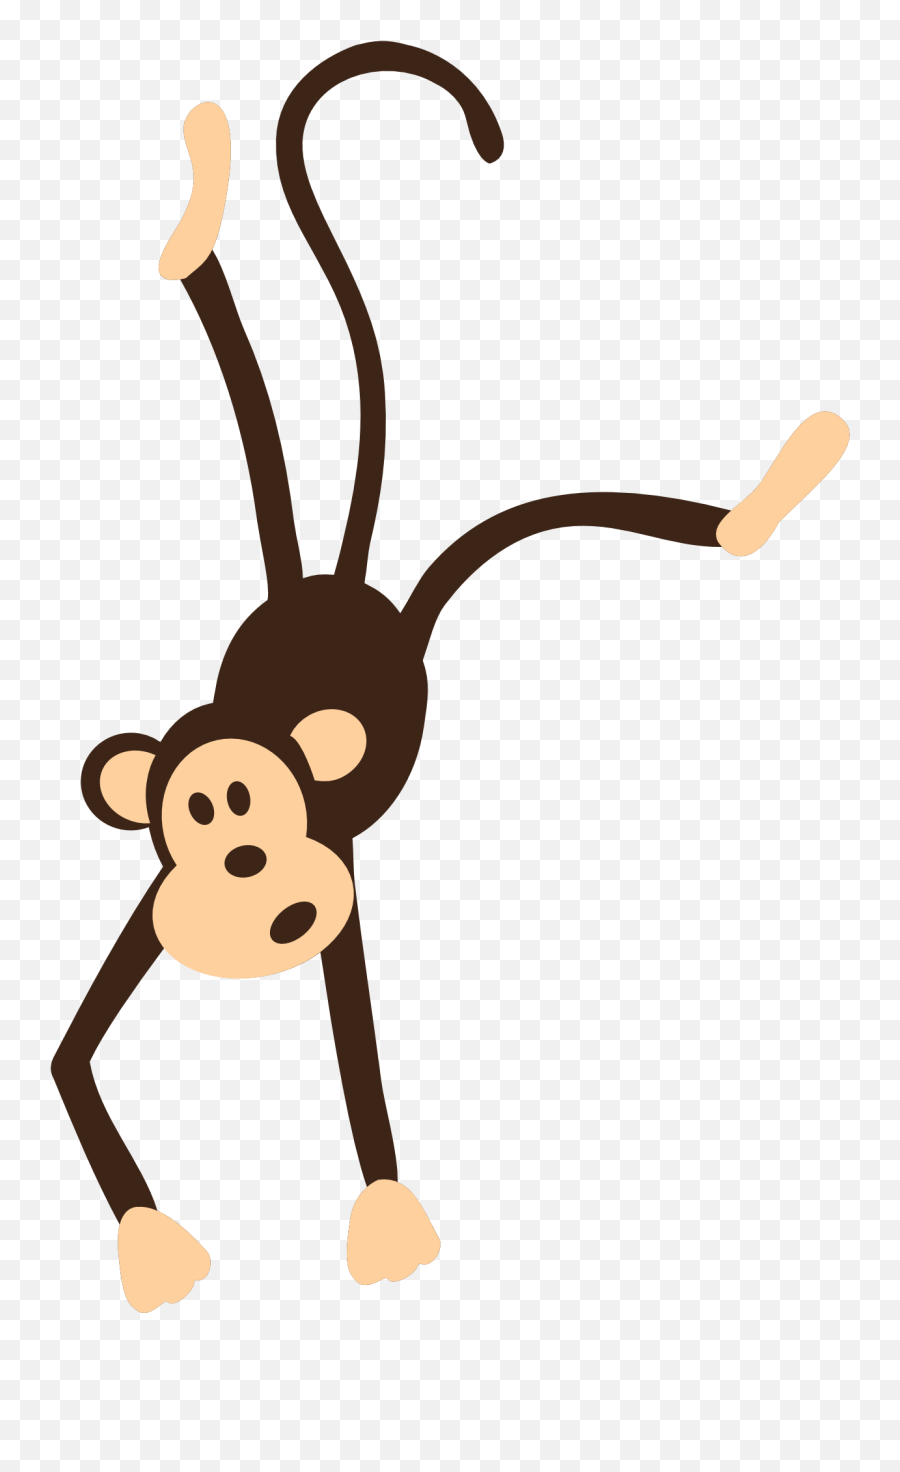 Transparent Png Images Icons And Clip Arts - Transparent Background Monkeys Clipart,Monkey Png